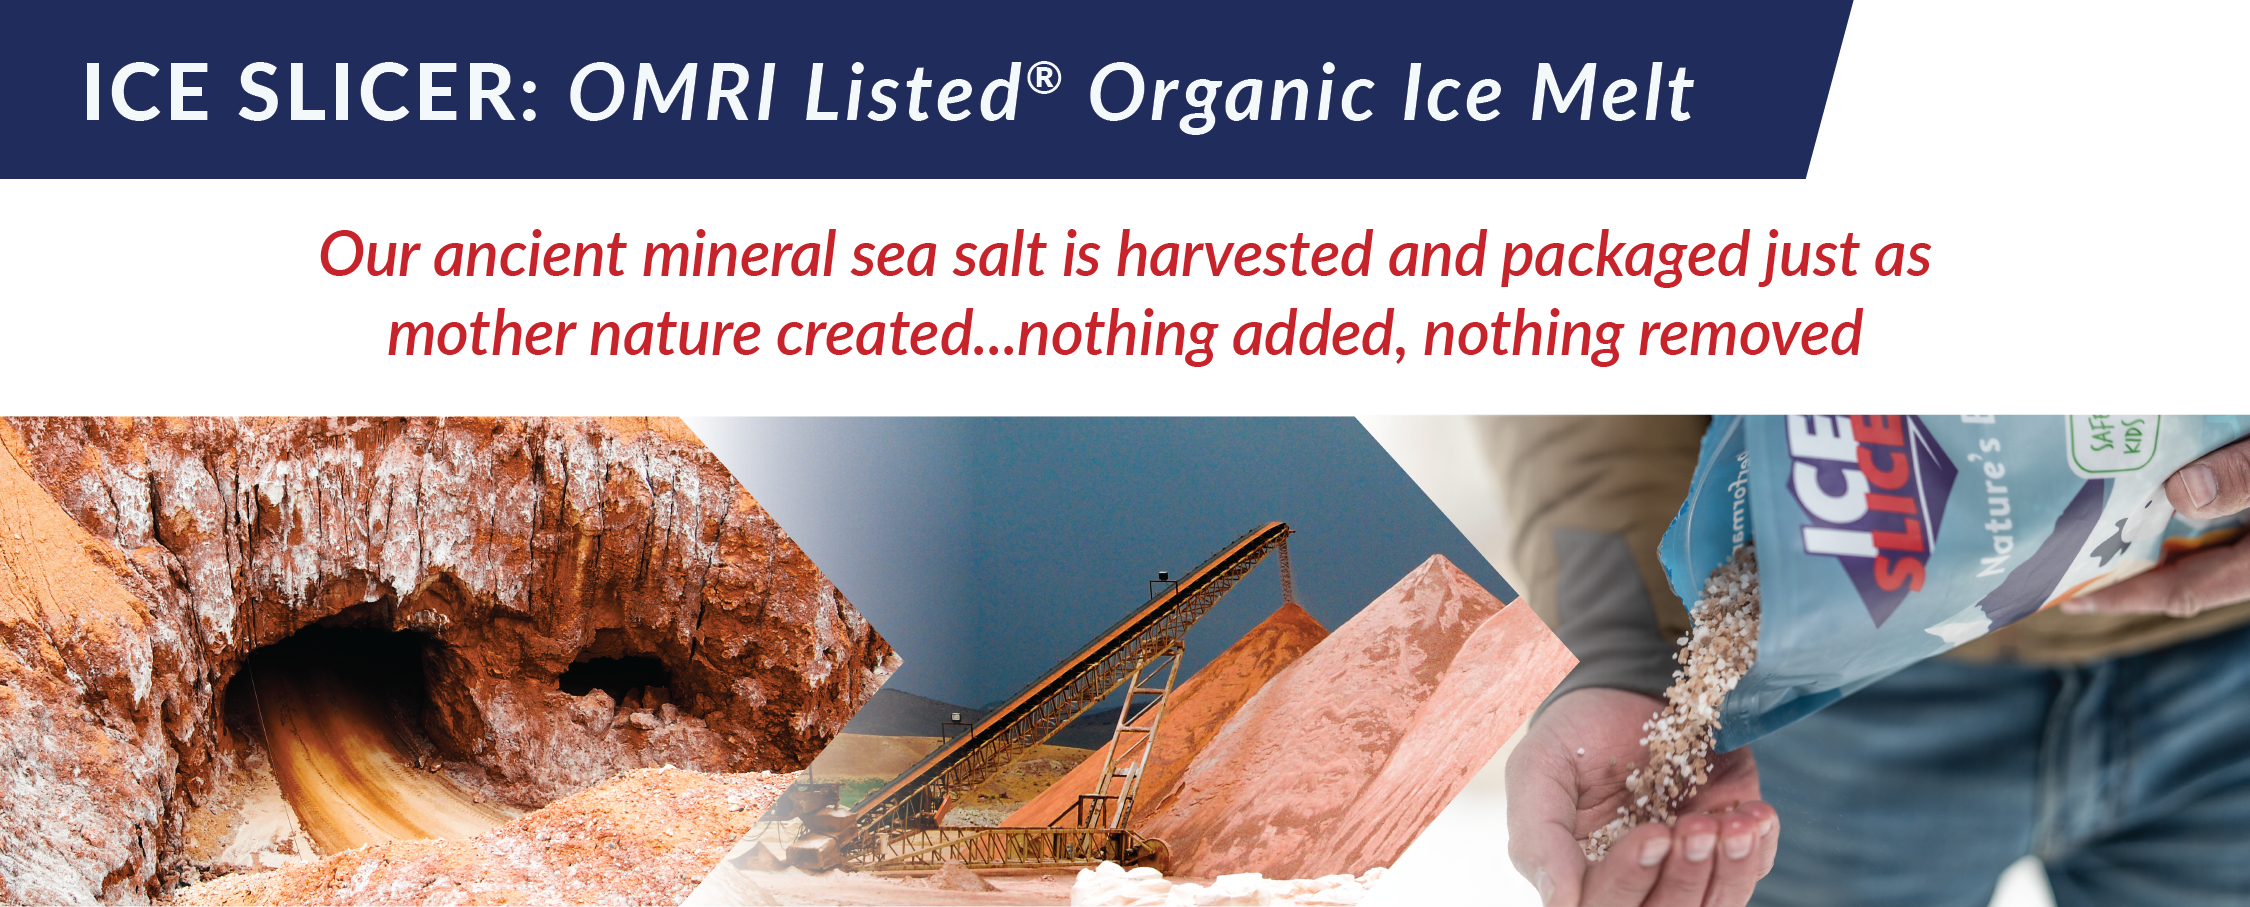 Ice Slicer is an OMRI Listed® product